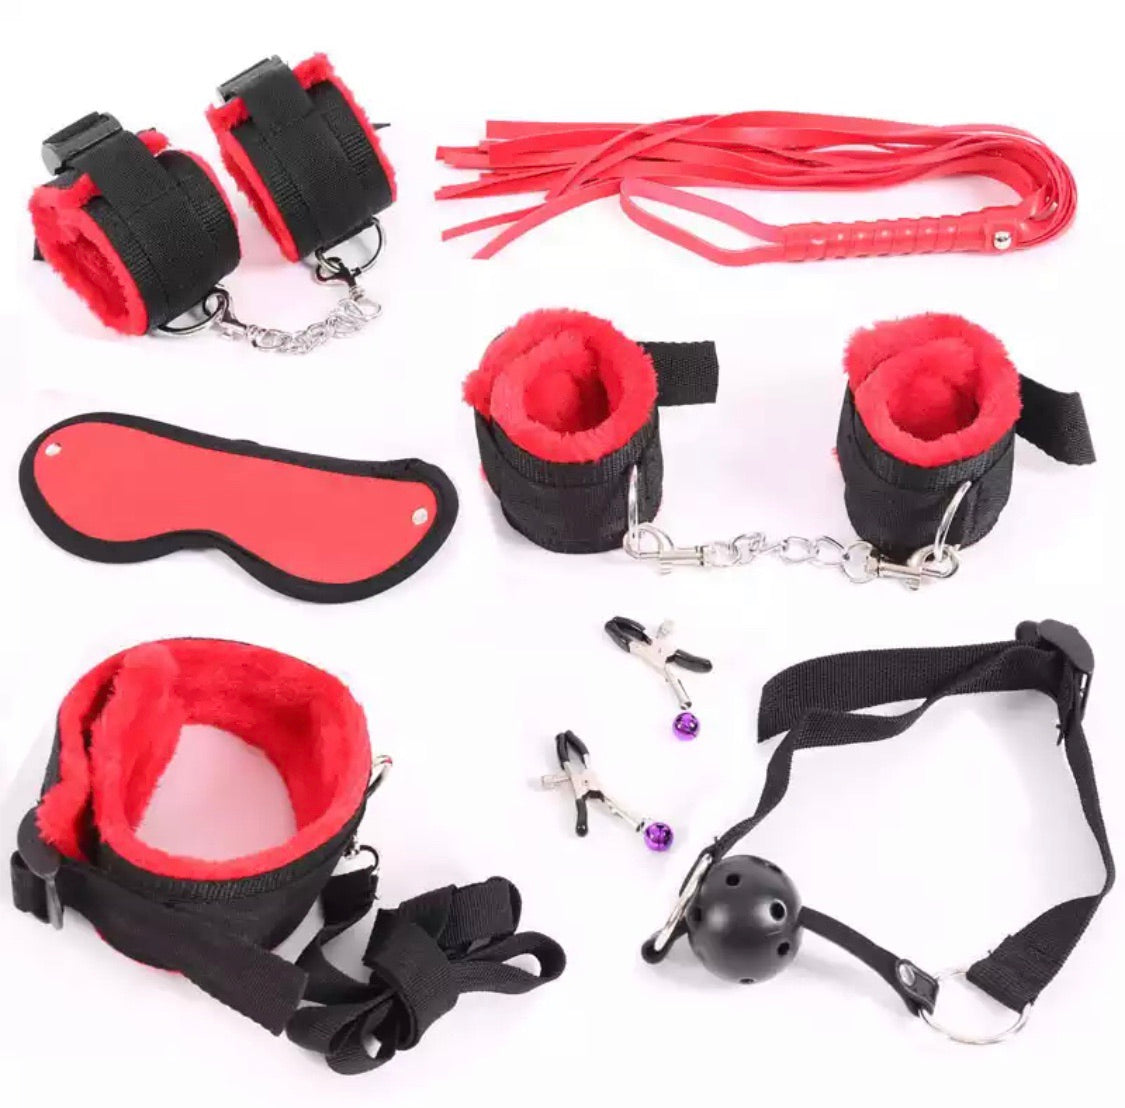 DDLGVERSE 7pcs Bondage set; handcuffs, anklecuffs, flogger, blindfold, collar and leash, nipple clamps, ball gag in red and black